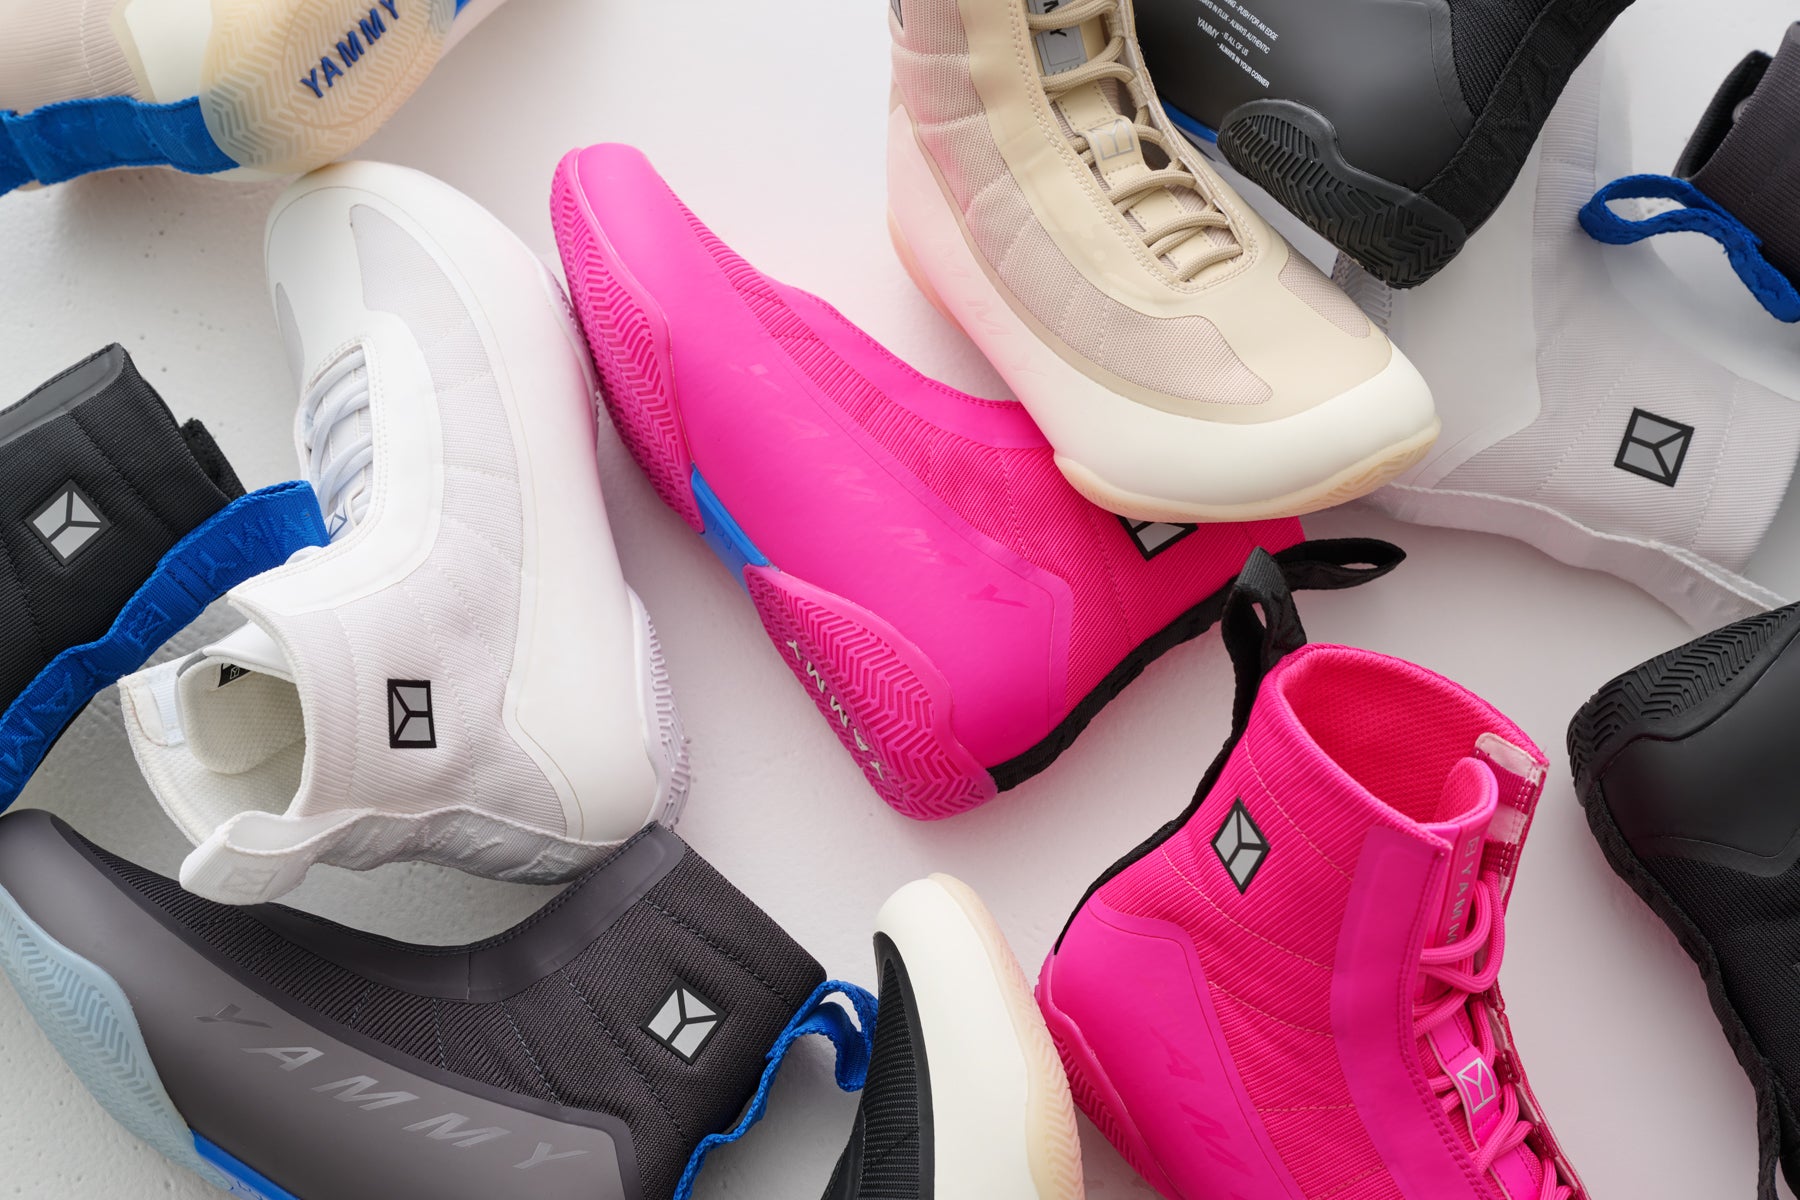 YAMMY Boxing Boots in white, black, pink, charcoal, blackbone, and beige